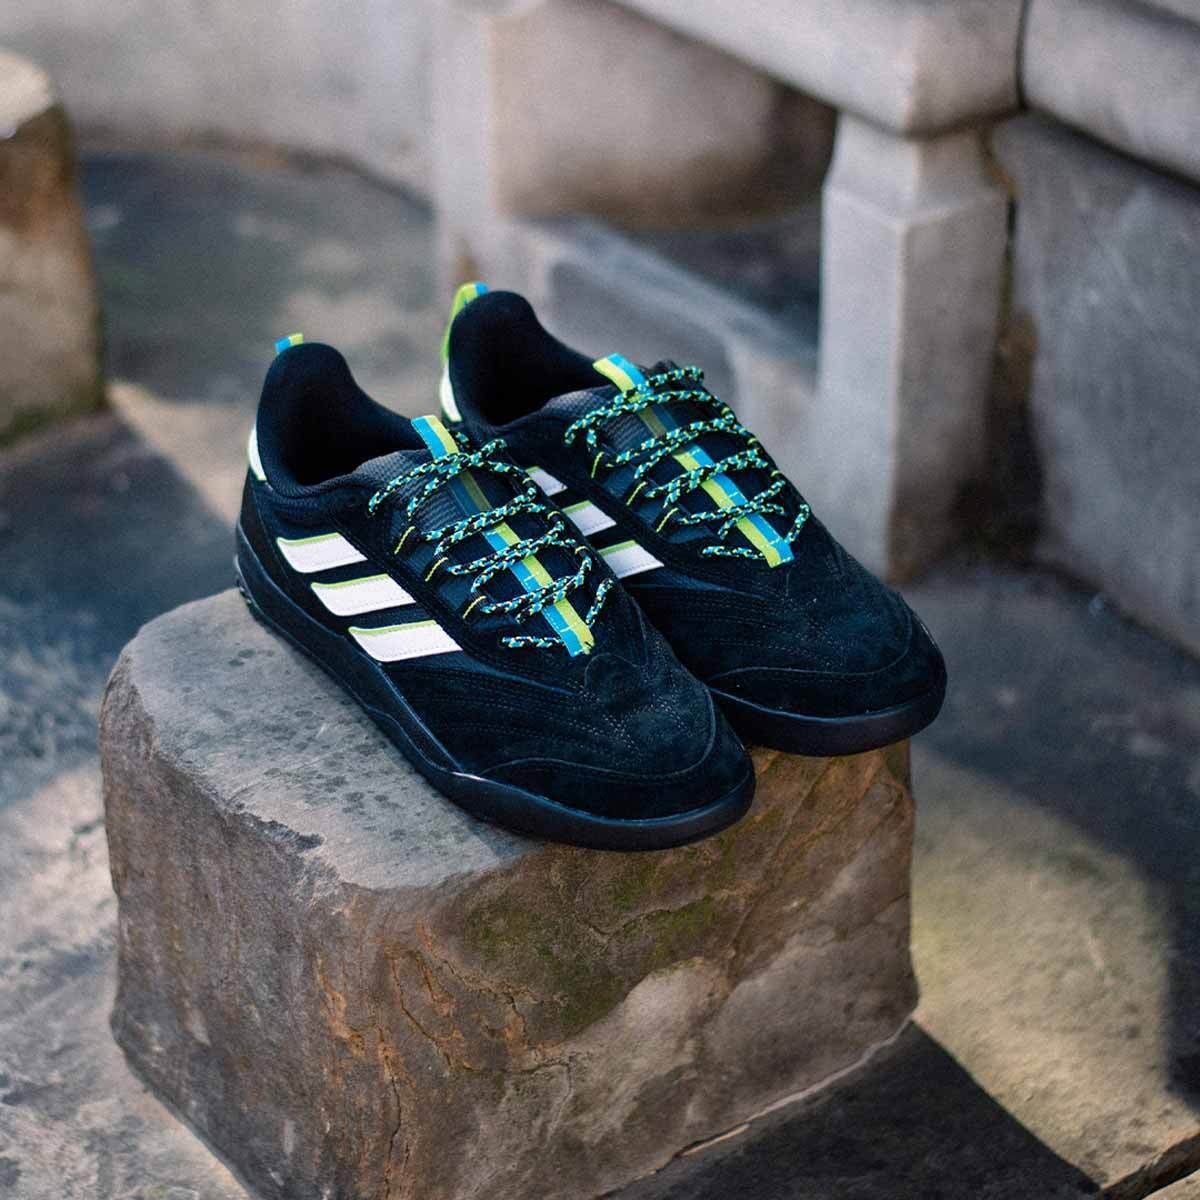 adidas copa nationale x mike arnold skate shoe